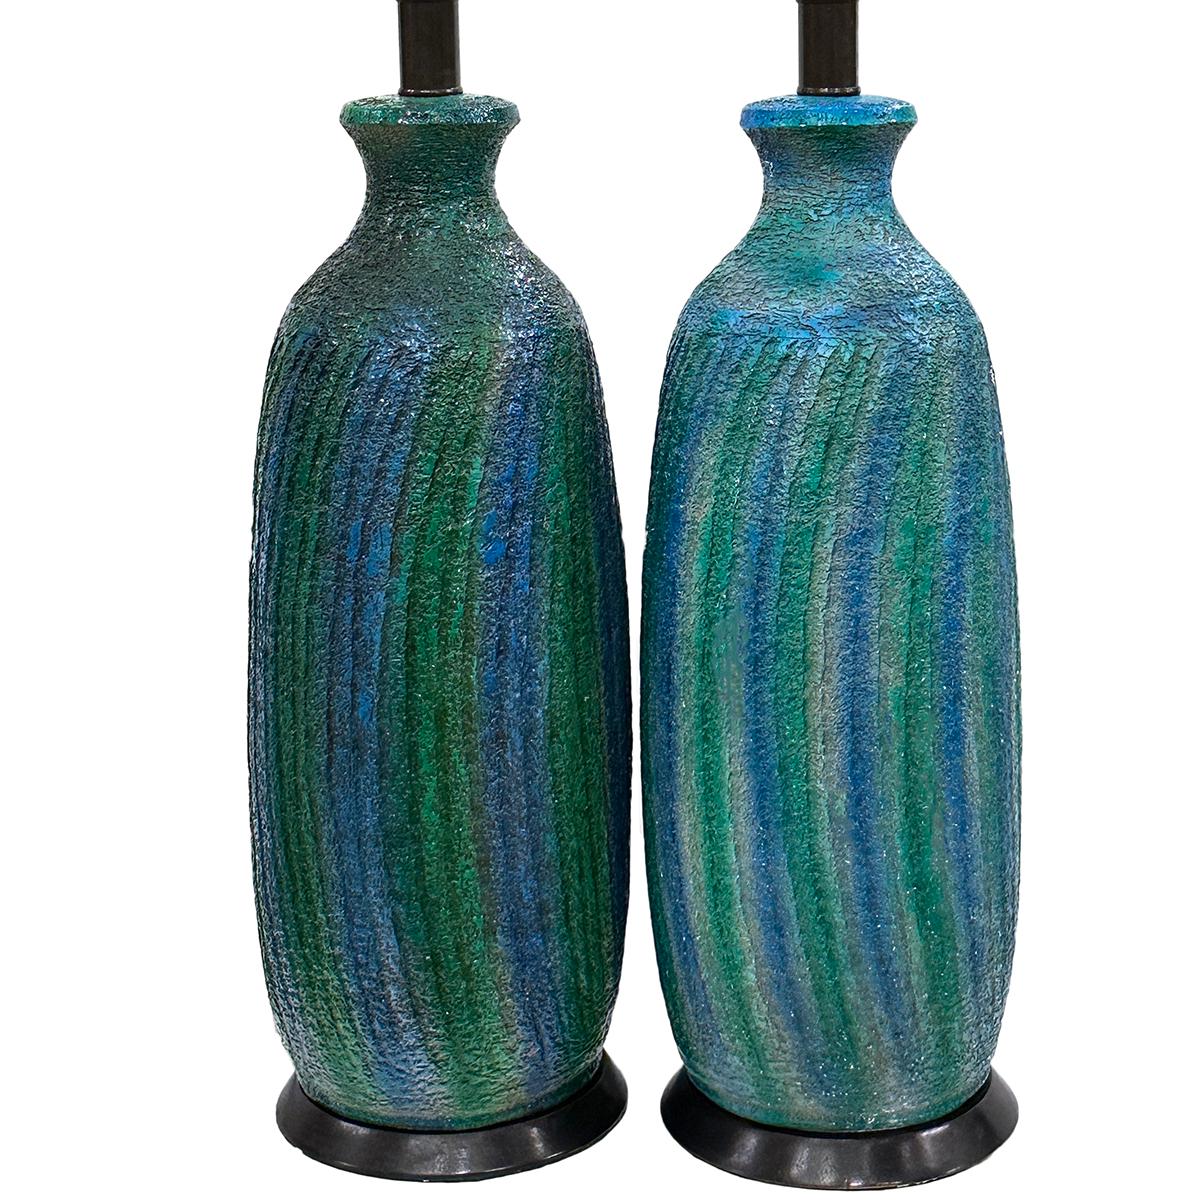 Pair of 1960's Italian lamps with blue shades.

Measurements:
Height of body: 22